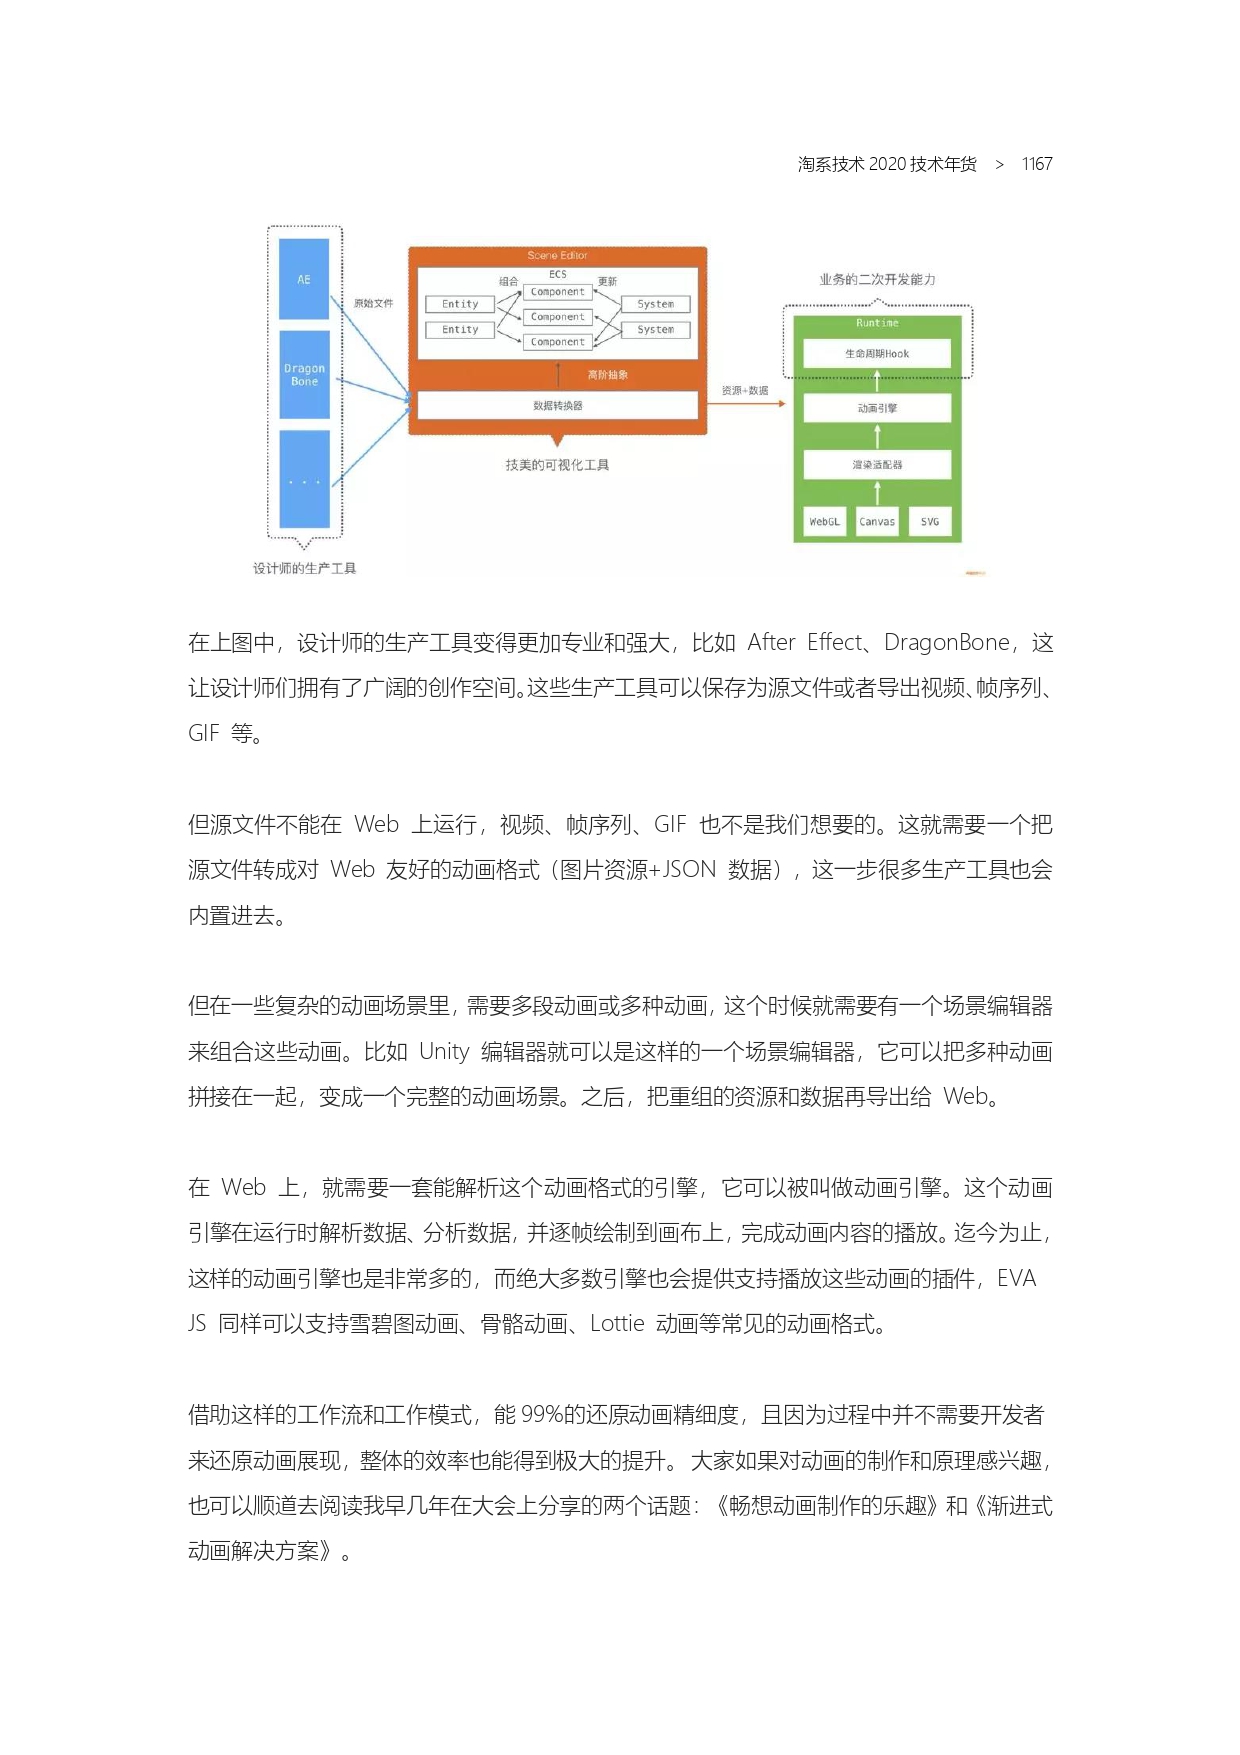 The Complete Works of Tao Technology 2020-571-1189-301-619_page-0297.jpg